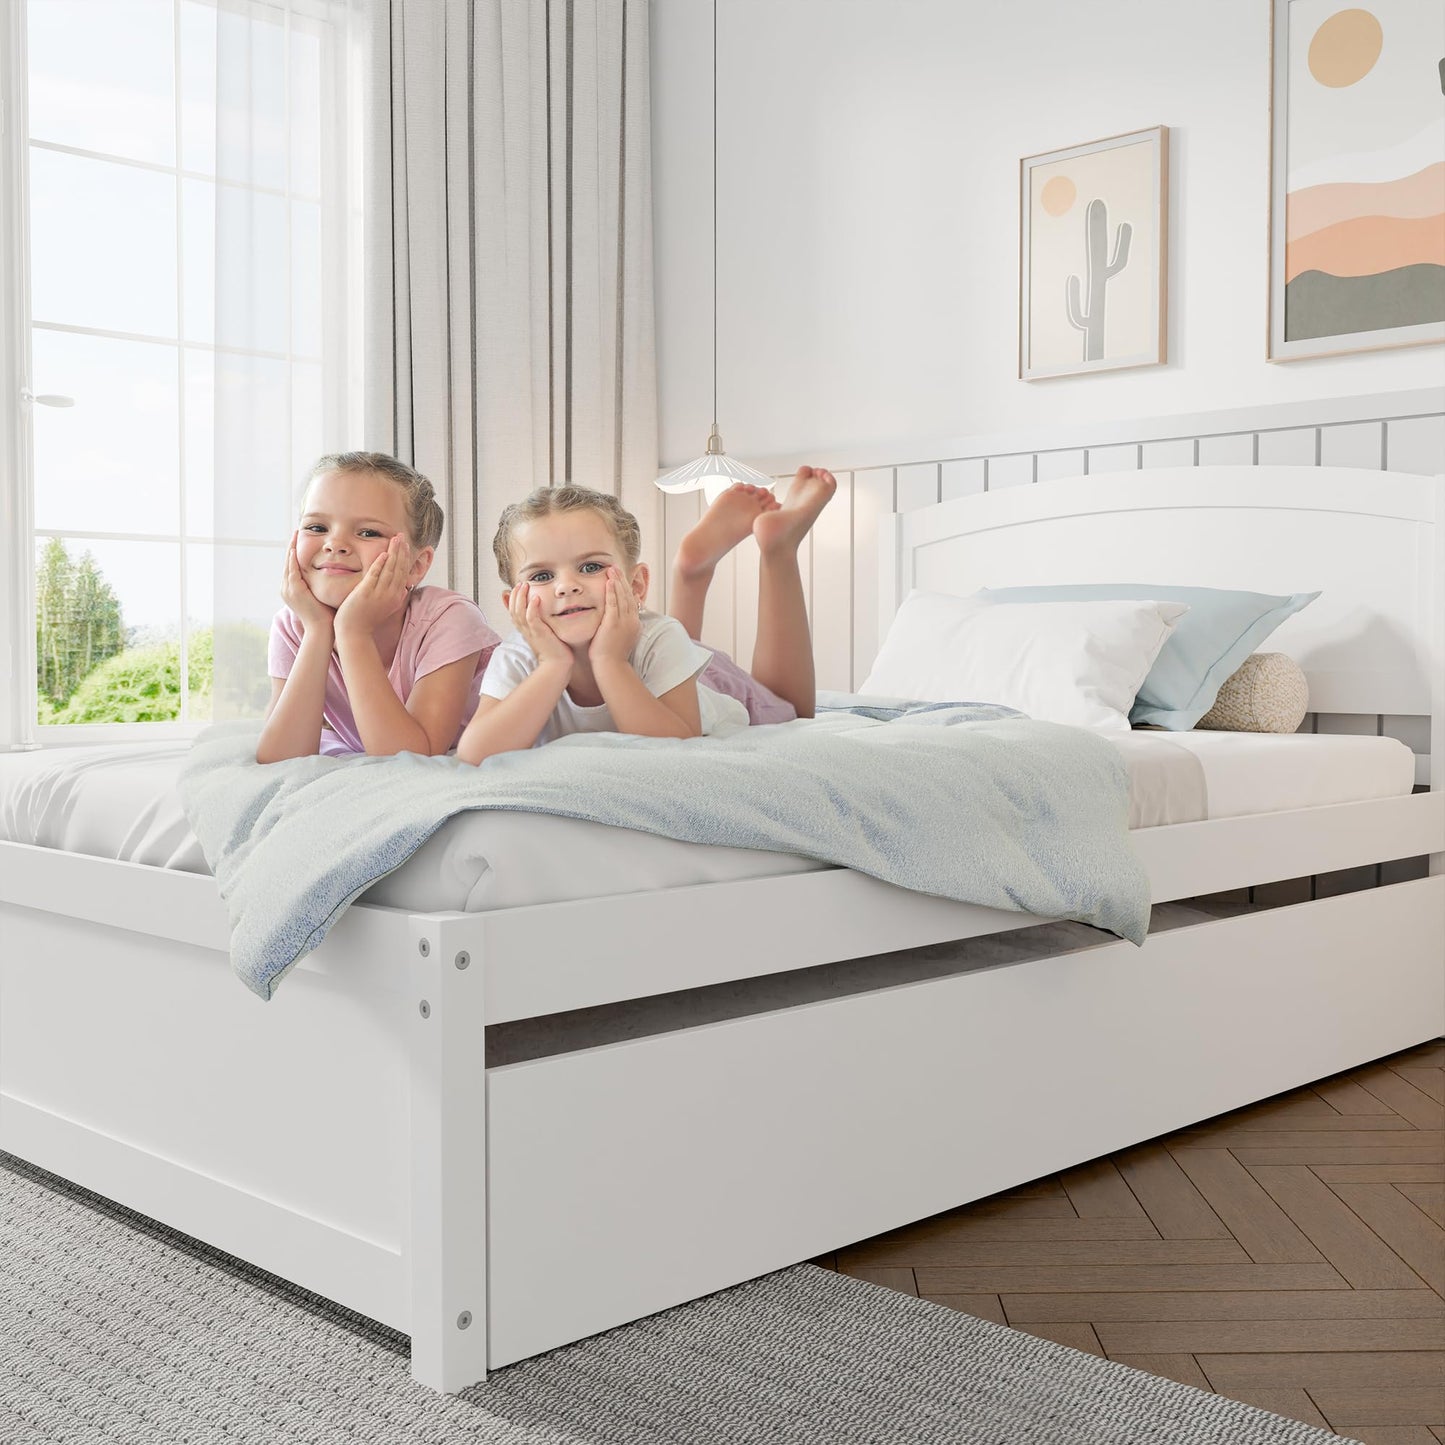 TOLEAD Daybed with Trundle, Twin Size Pull Out Bed, Solid Wood Extendable Day Bed with Pop Up Trundle, Include Slat Support (White, Trundle)